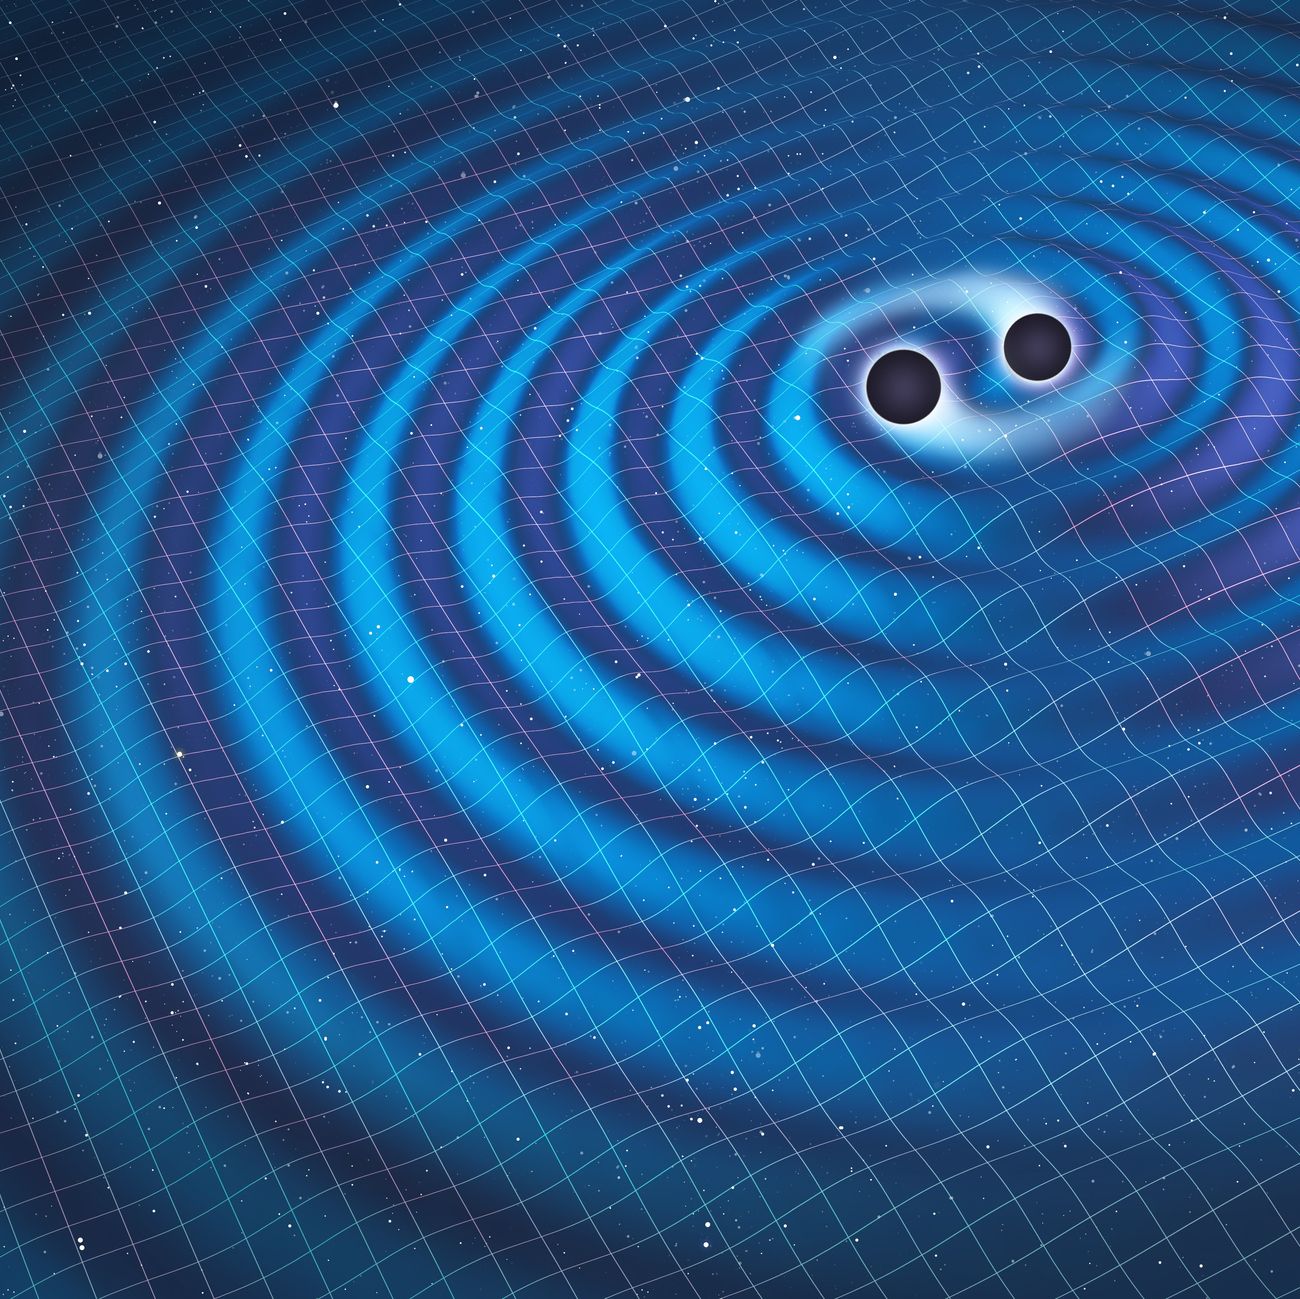 We Might Soon Be Able to See Missing Ripples in Spacetime